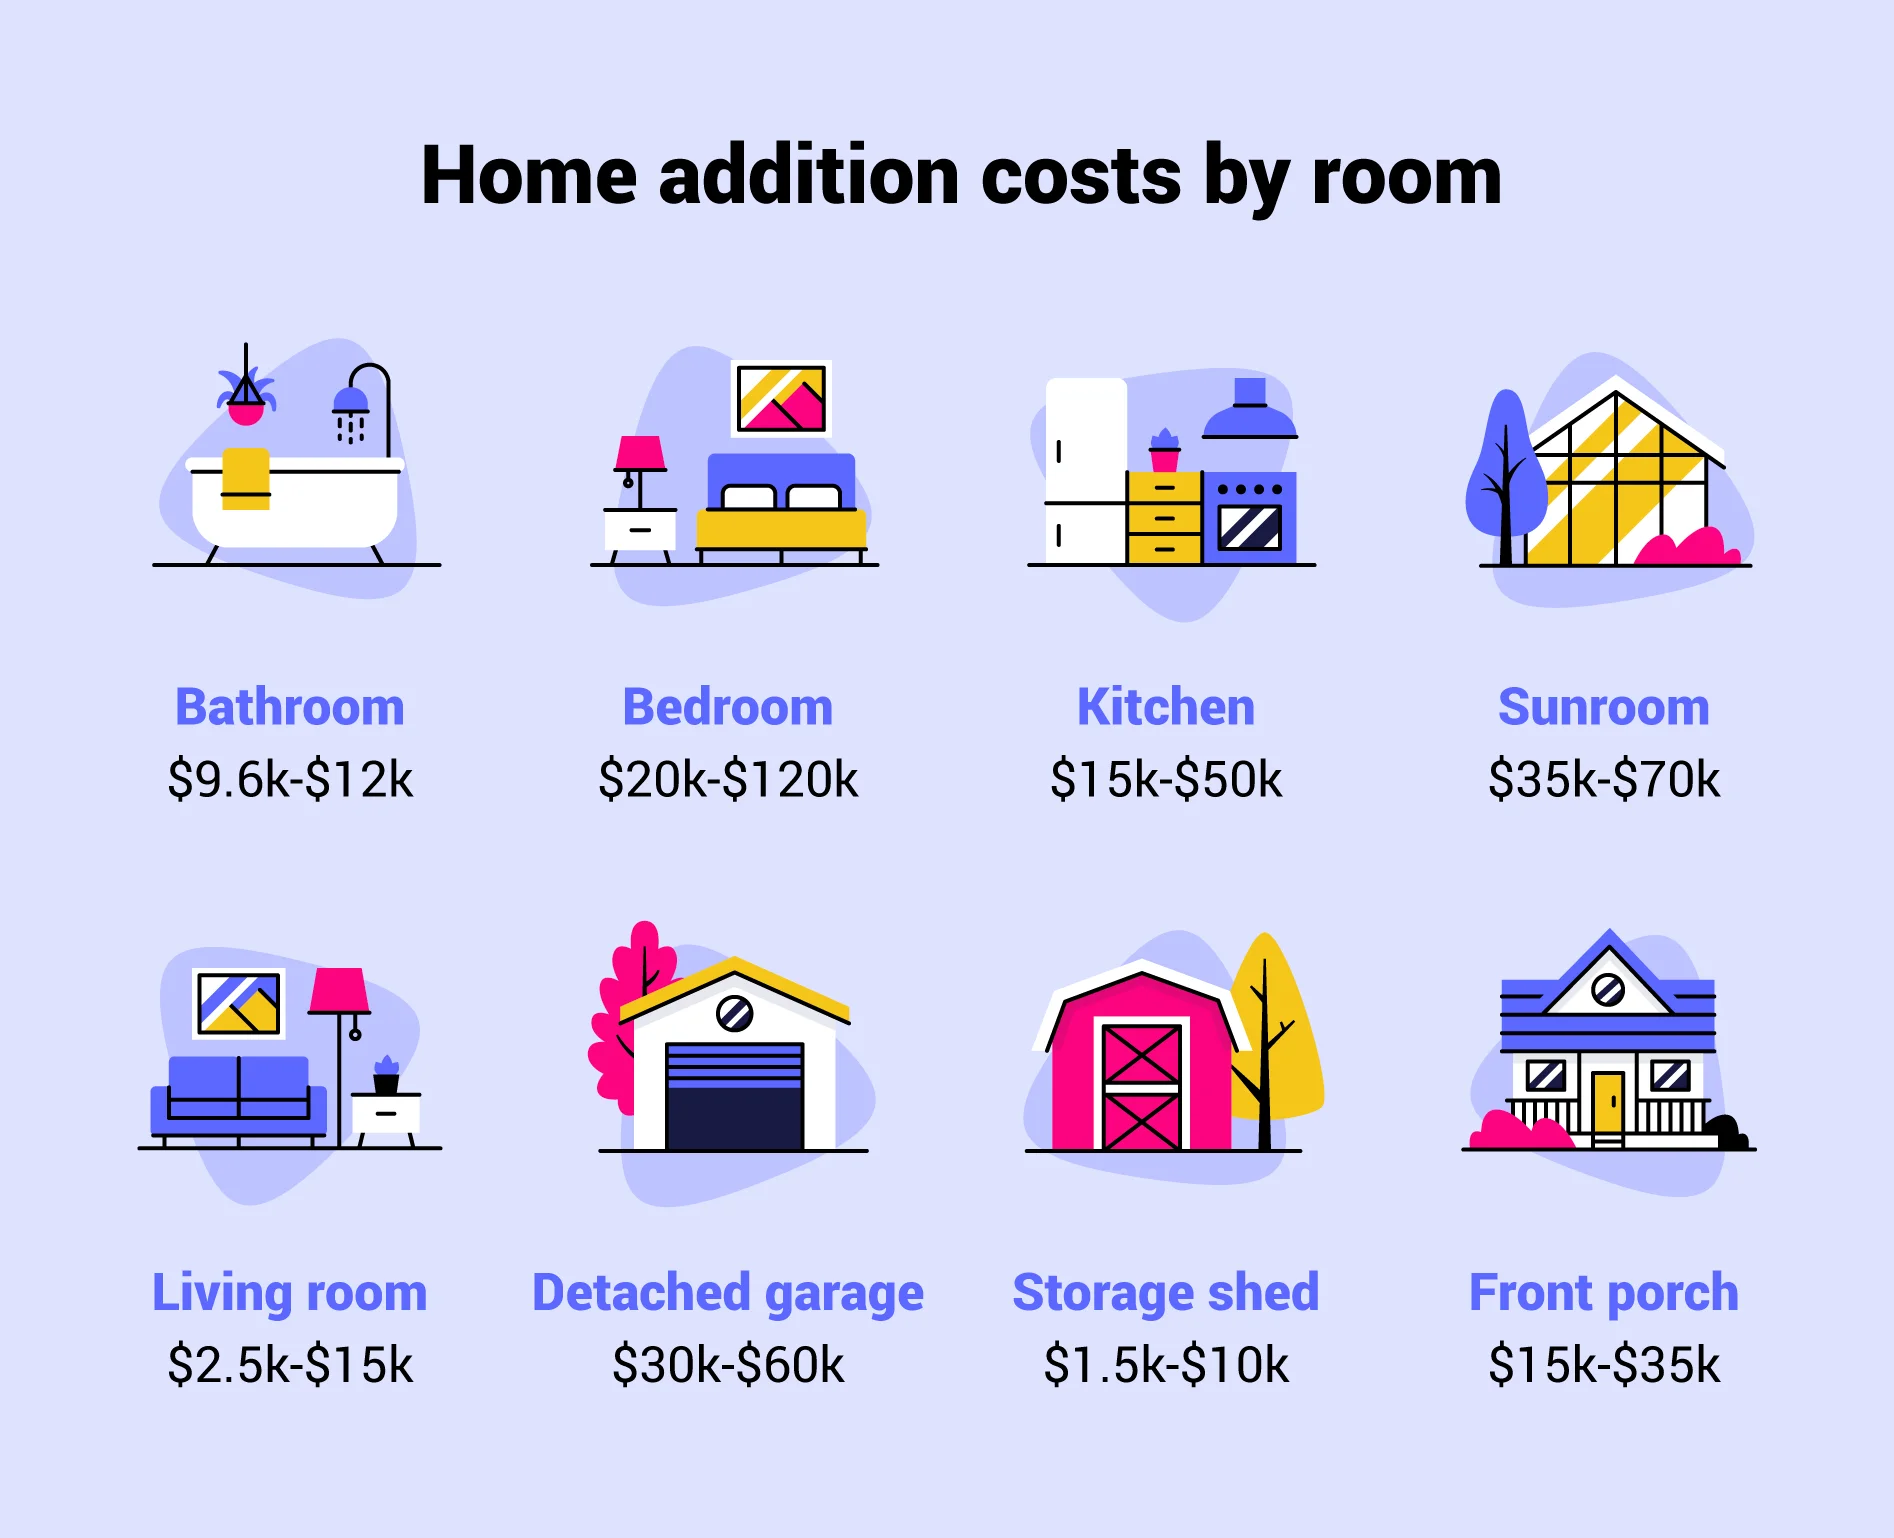 Average cost of home additions